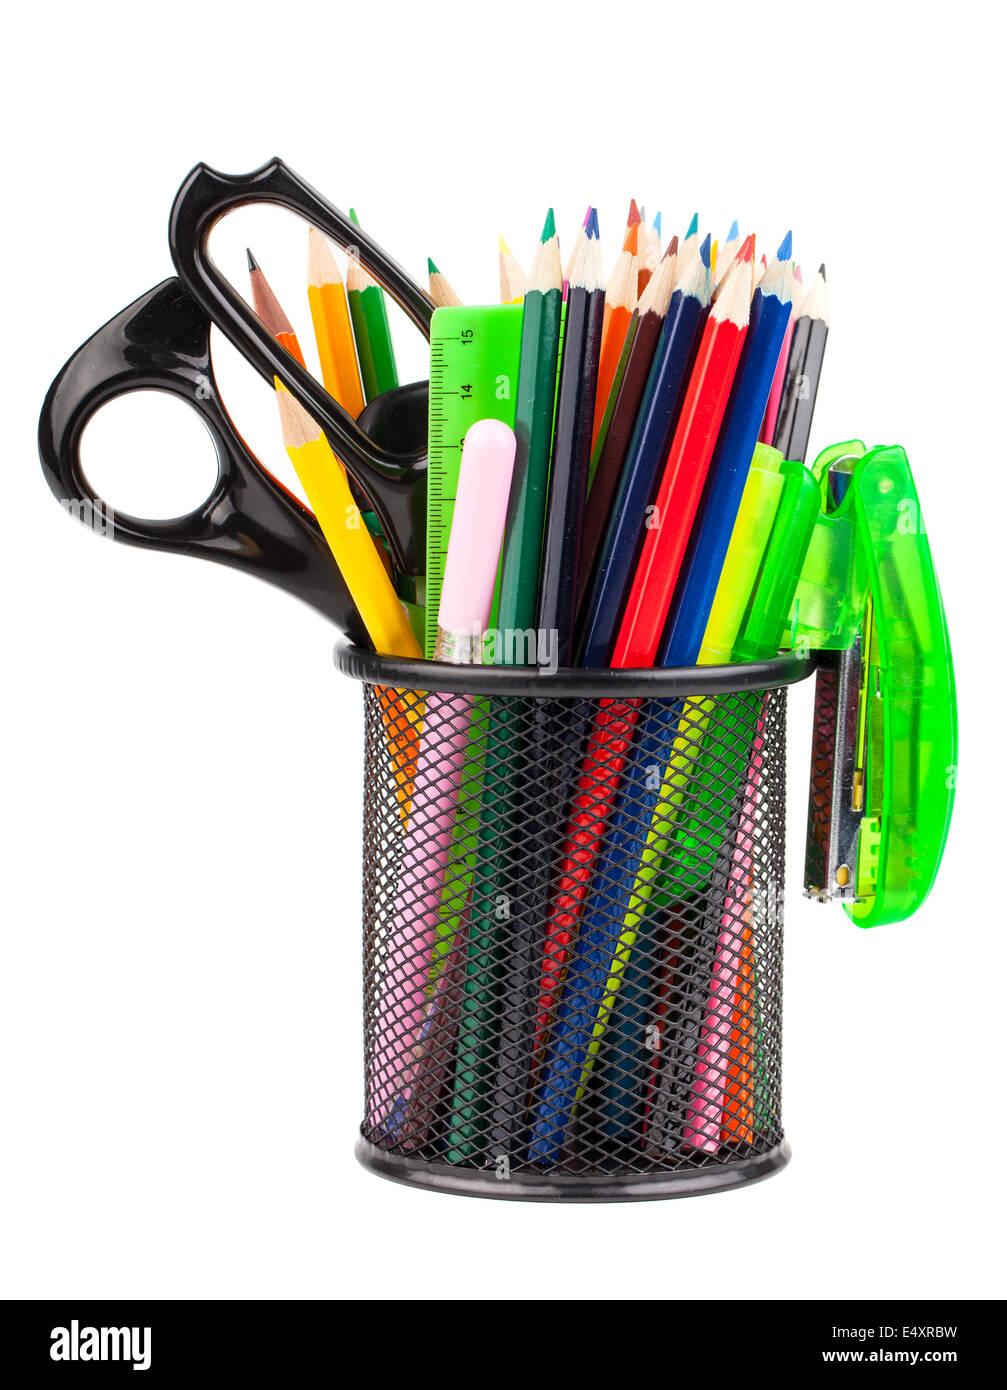 Office cup with scissors, pencils and pens Stock Photo